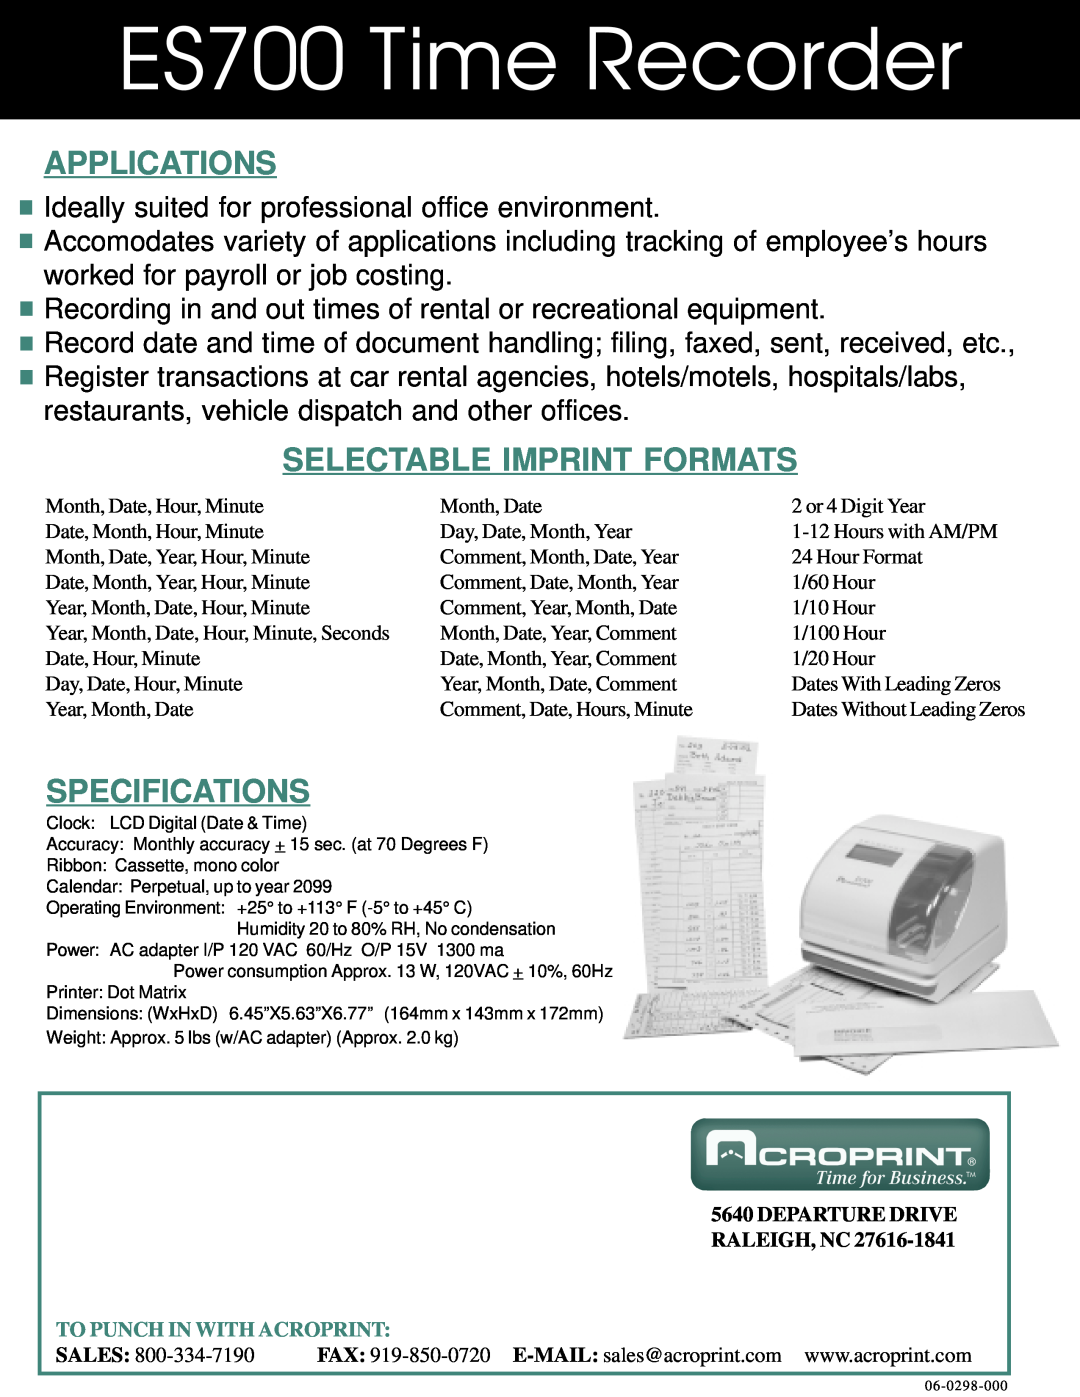 Acroprint ES700 Time Recorder, Applications, Selectable Imprint Formats, Specifications, Departure Drive Raleigh, Nc 